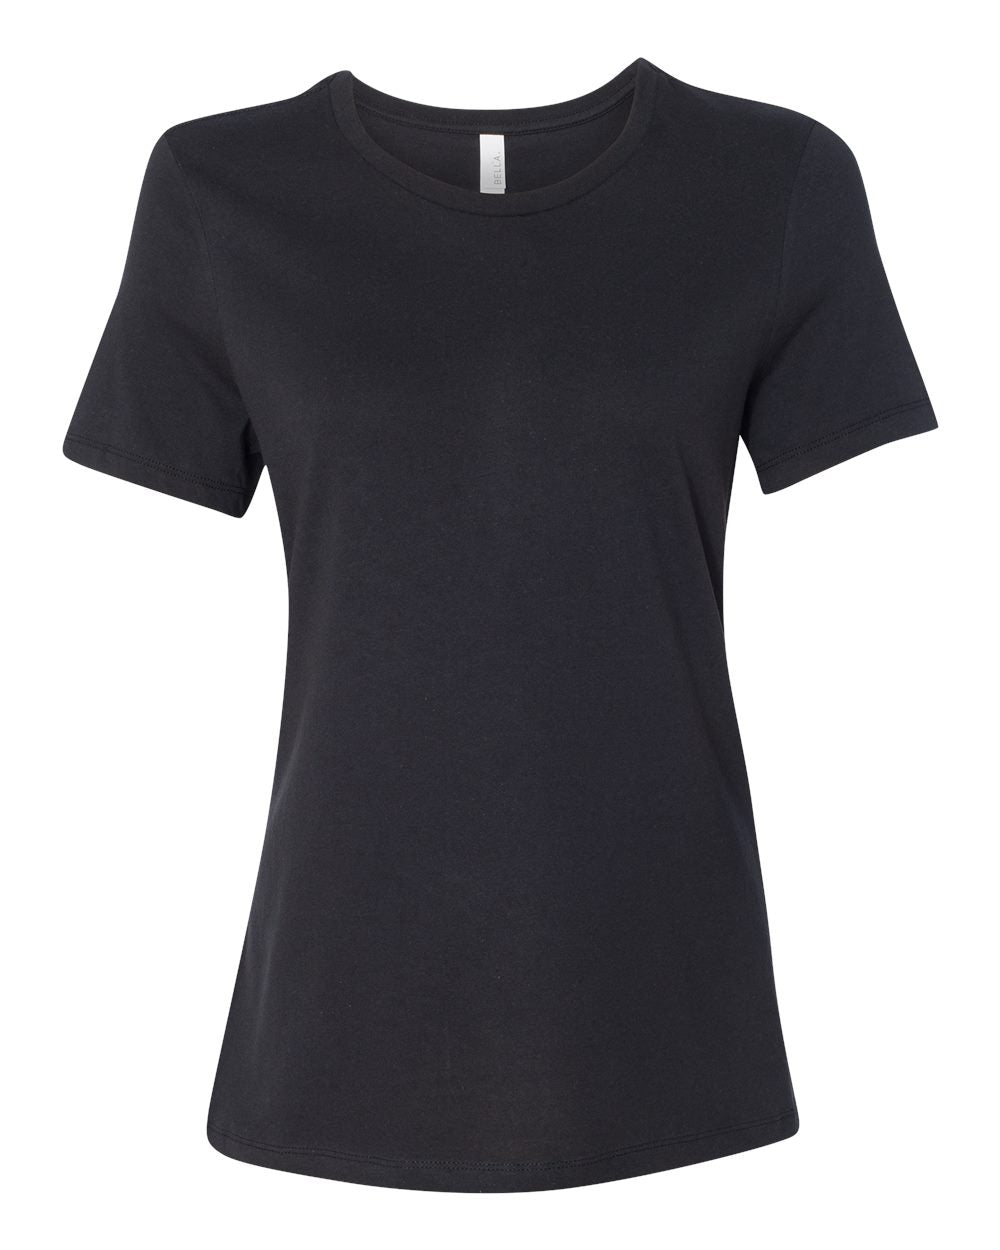 bella+canvas womens relaxed tee vintage black